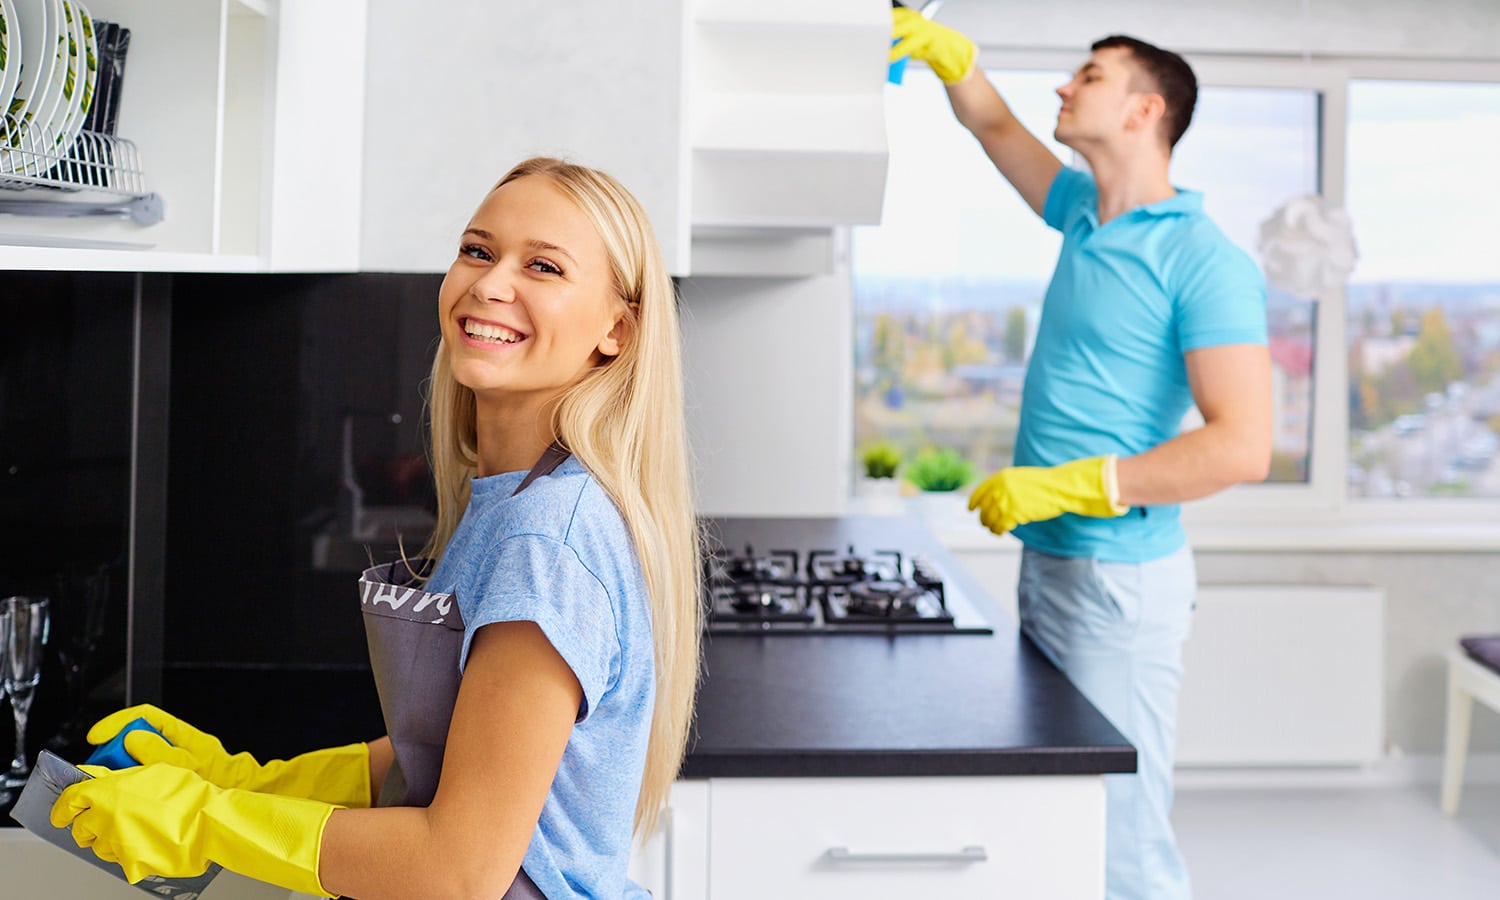 https://www.cleannationco.com/wp-content/uploads/2022/07/Professional-Cleaning-Services.jpeg